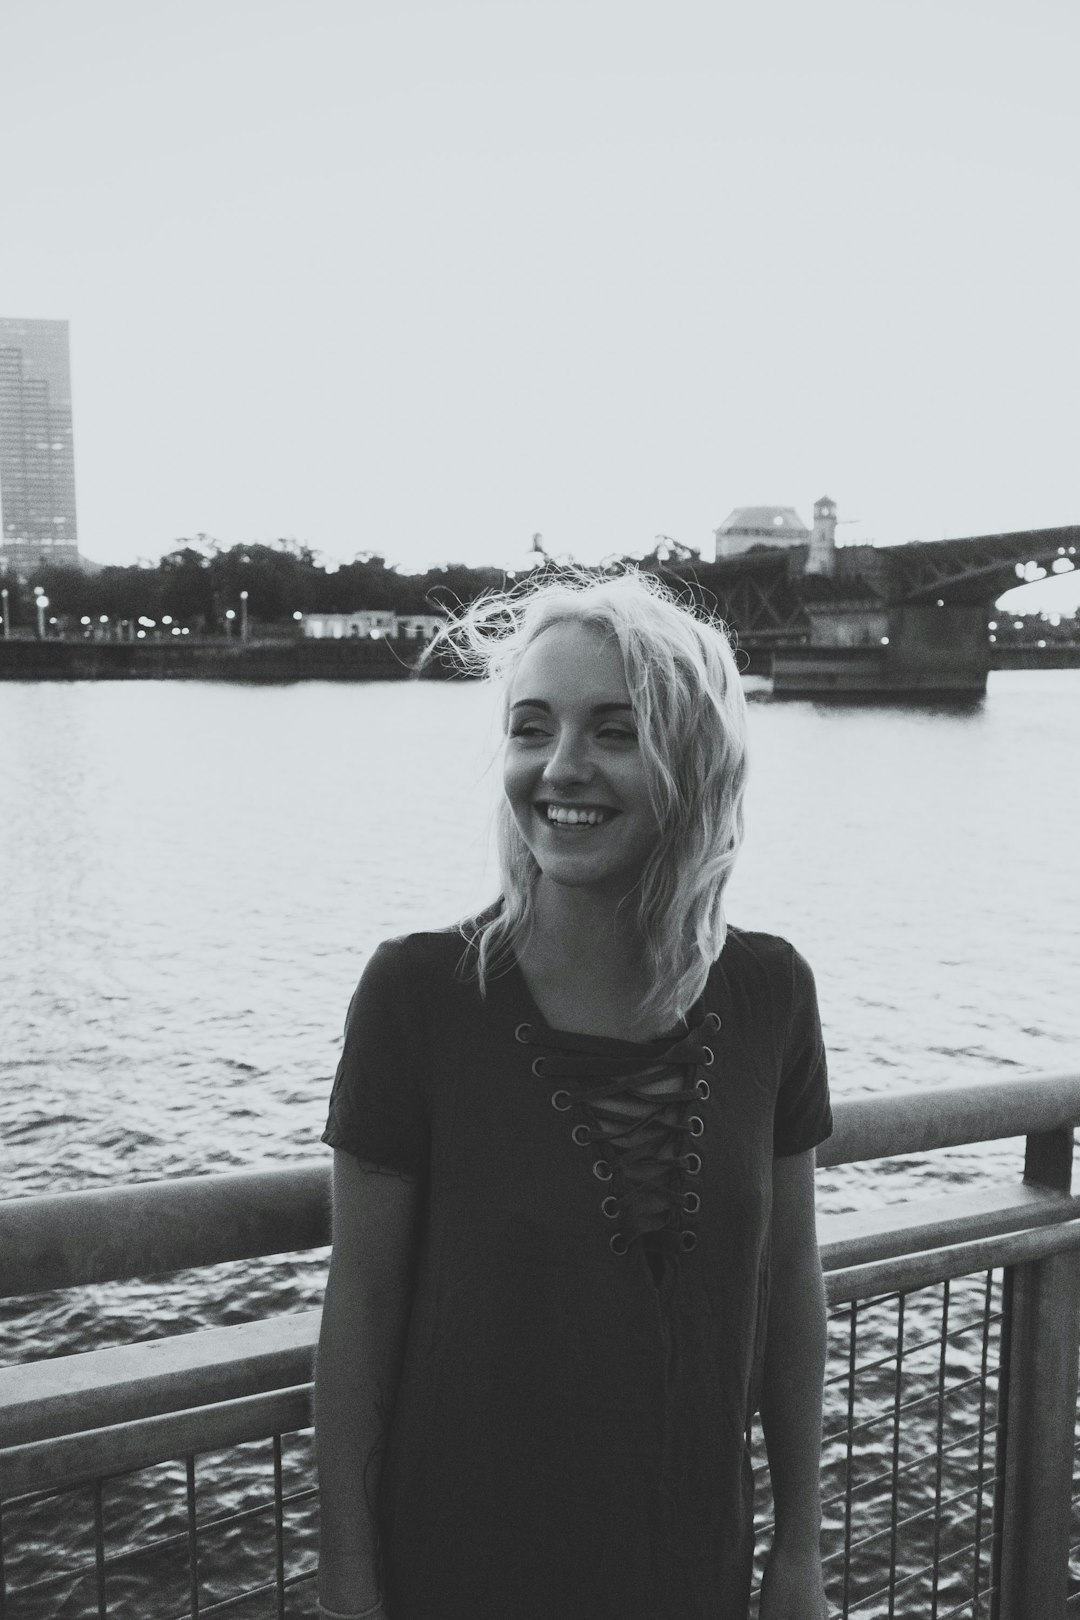 grayscale photo of smiling woman standing near fence above body of water